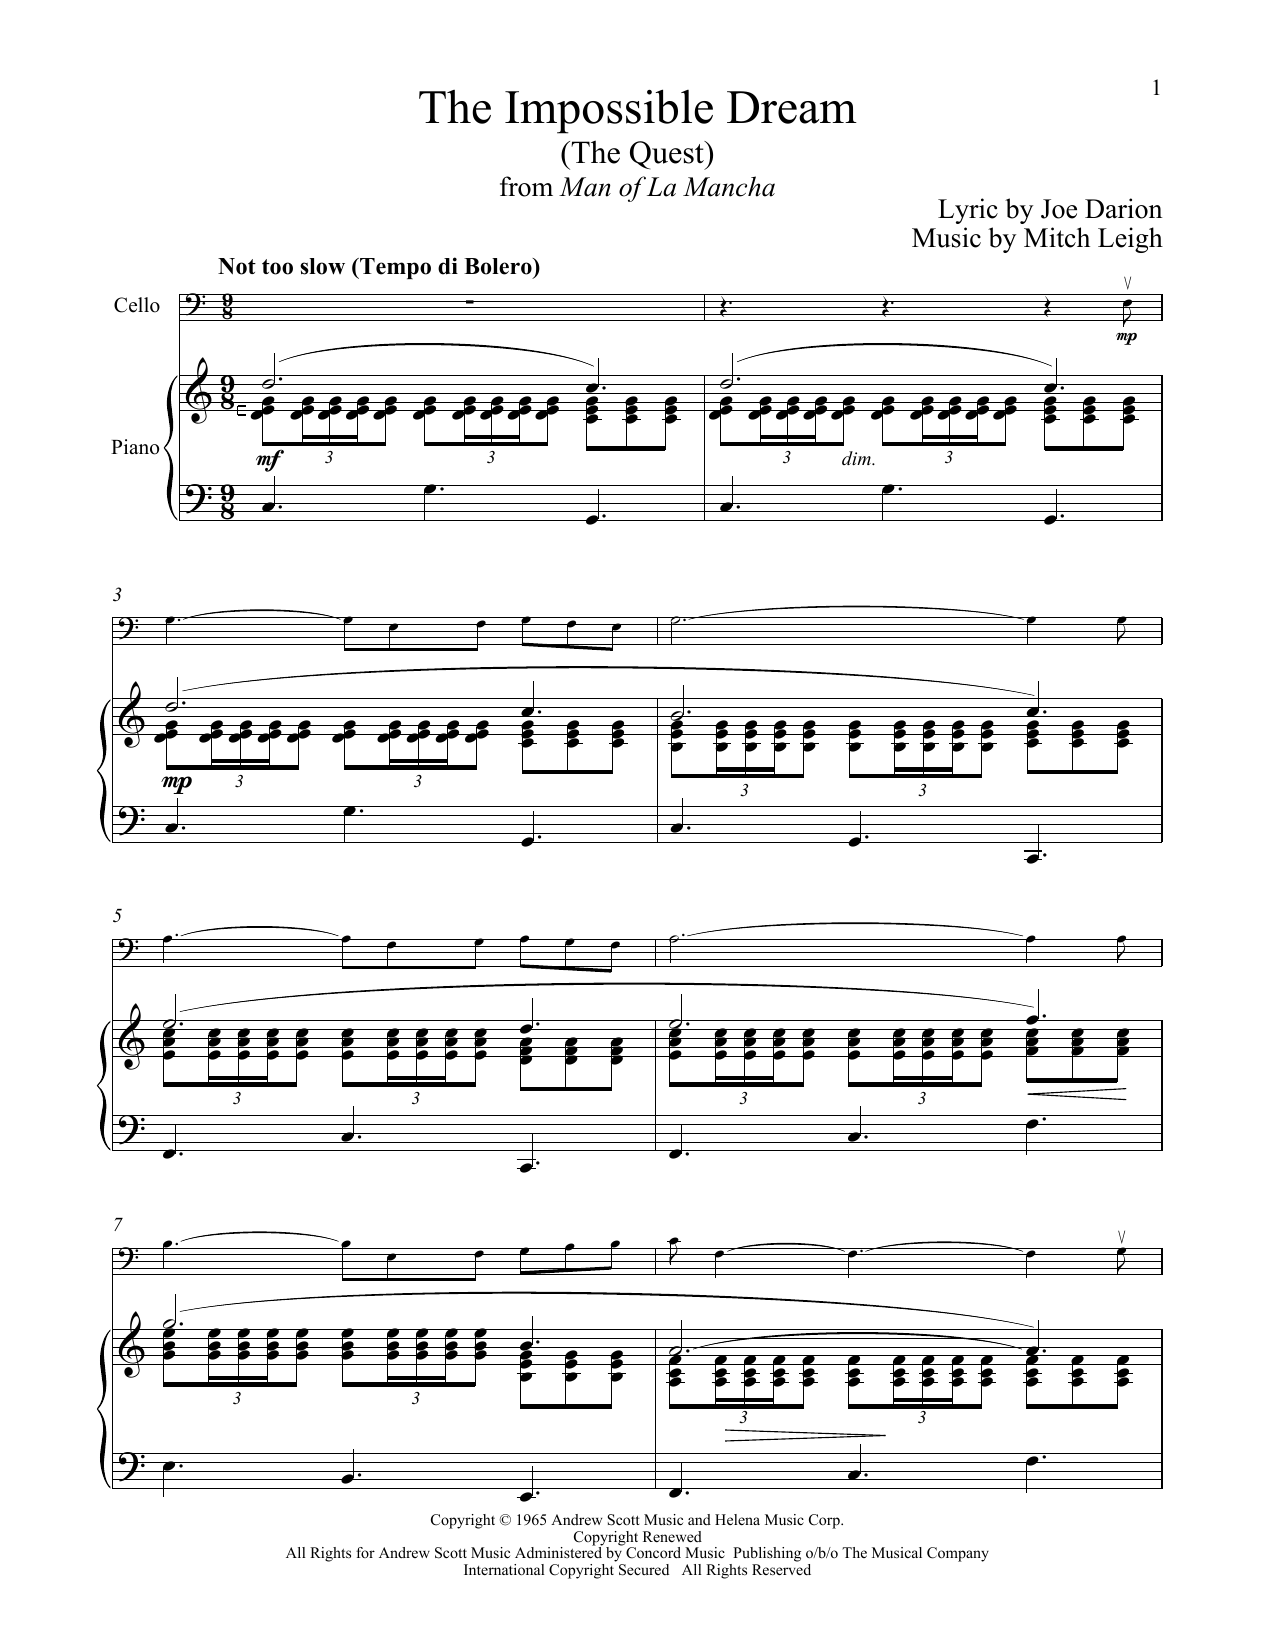 Download Mitch Leigh The Impossible Dream (The Quest) (from Sheet Music